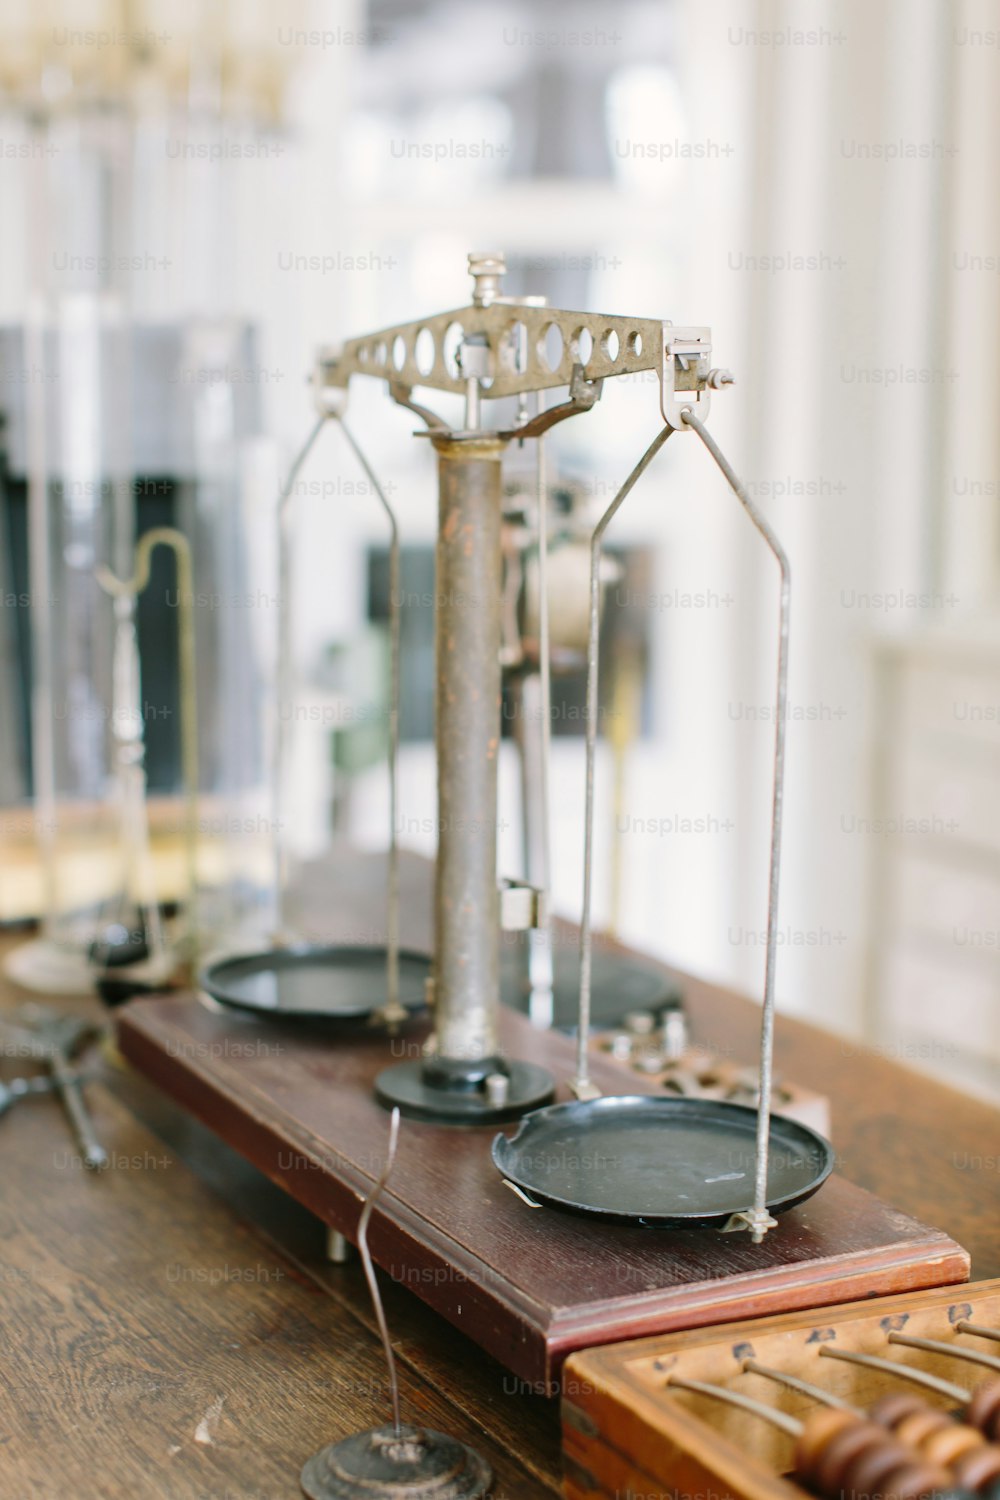 Vintage pharmaceutical scales on an old wooden table with other pharmaceutical supplies.